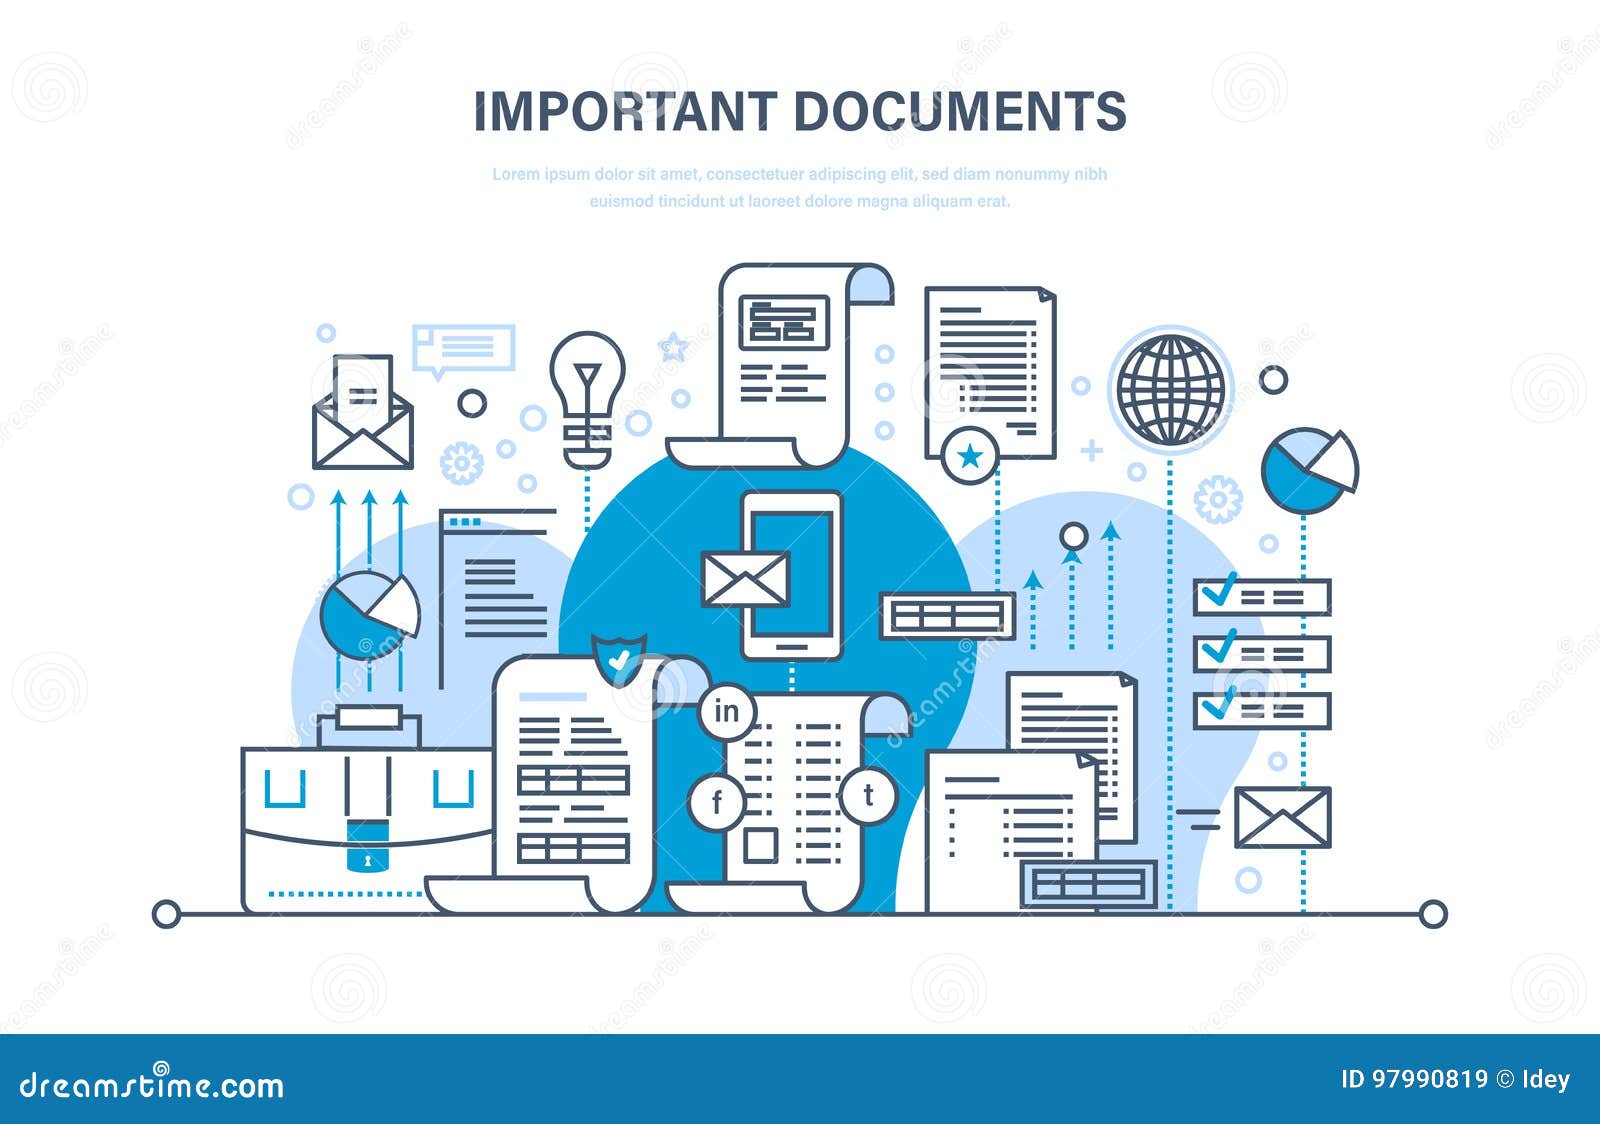 important documents concept. business documents, business accounts, working reporting files.